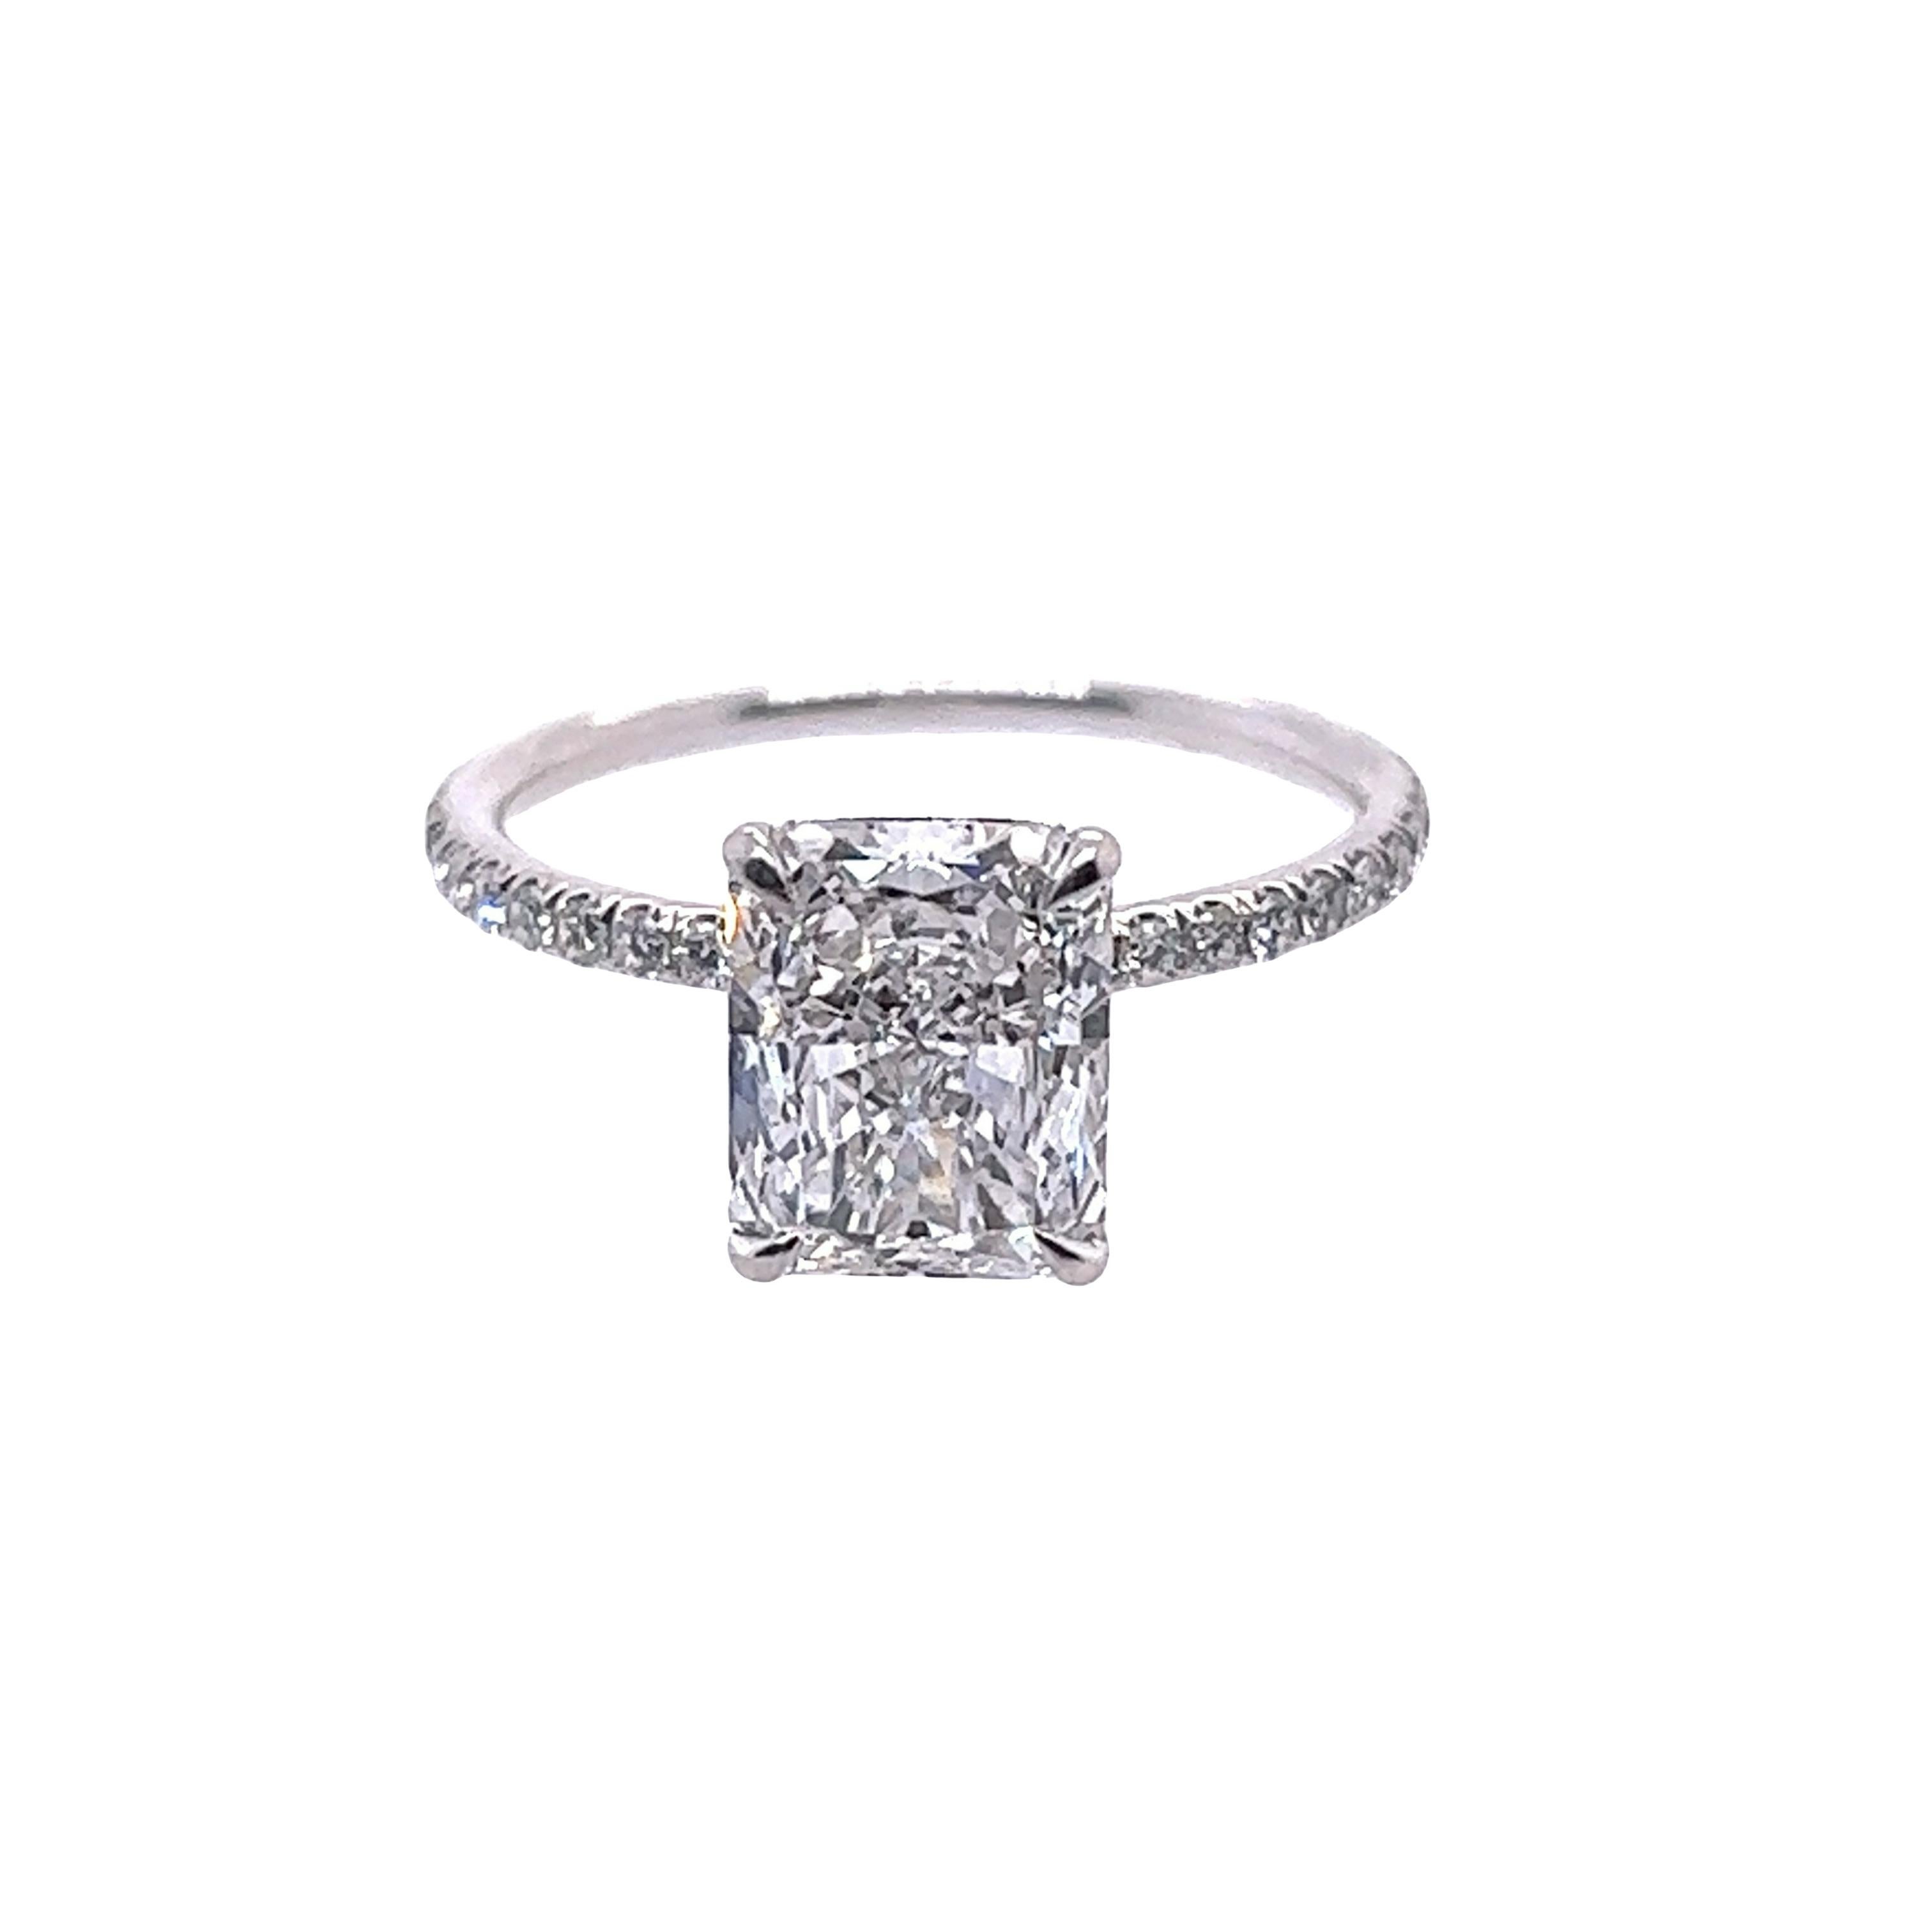 Rosenberg Diamonds & Co. 2.30 carat Radiant cut D color Flawless clarity is accompanied by a GIA certificate. This exquisite Radiant cut is full of brilliance and it is set in a handmade platinum setting. This ring continues its elegance with a